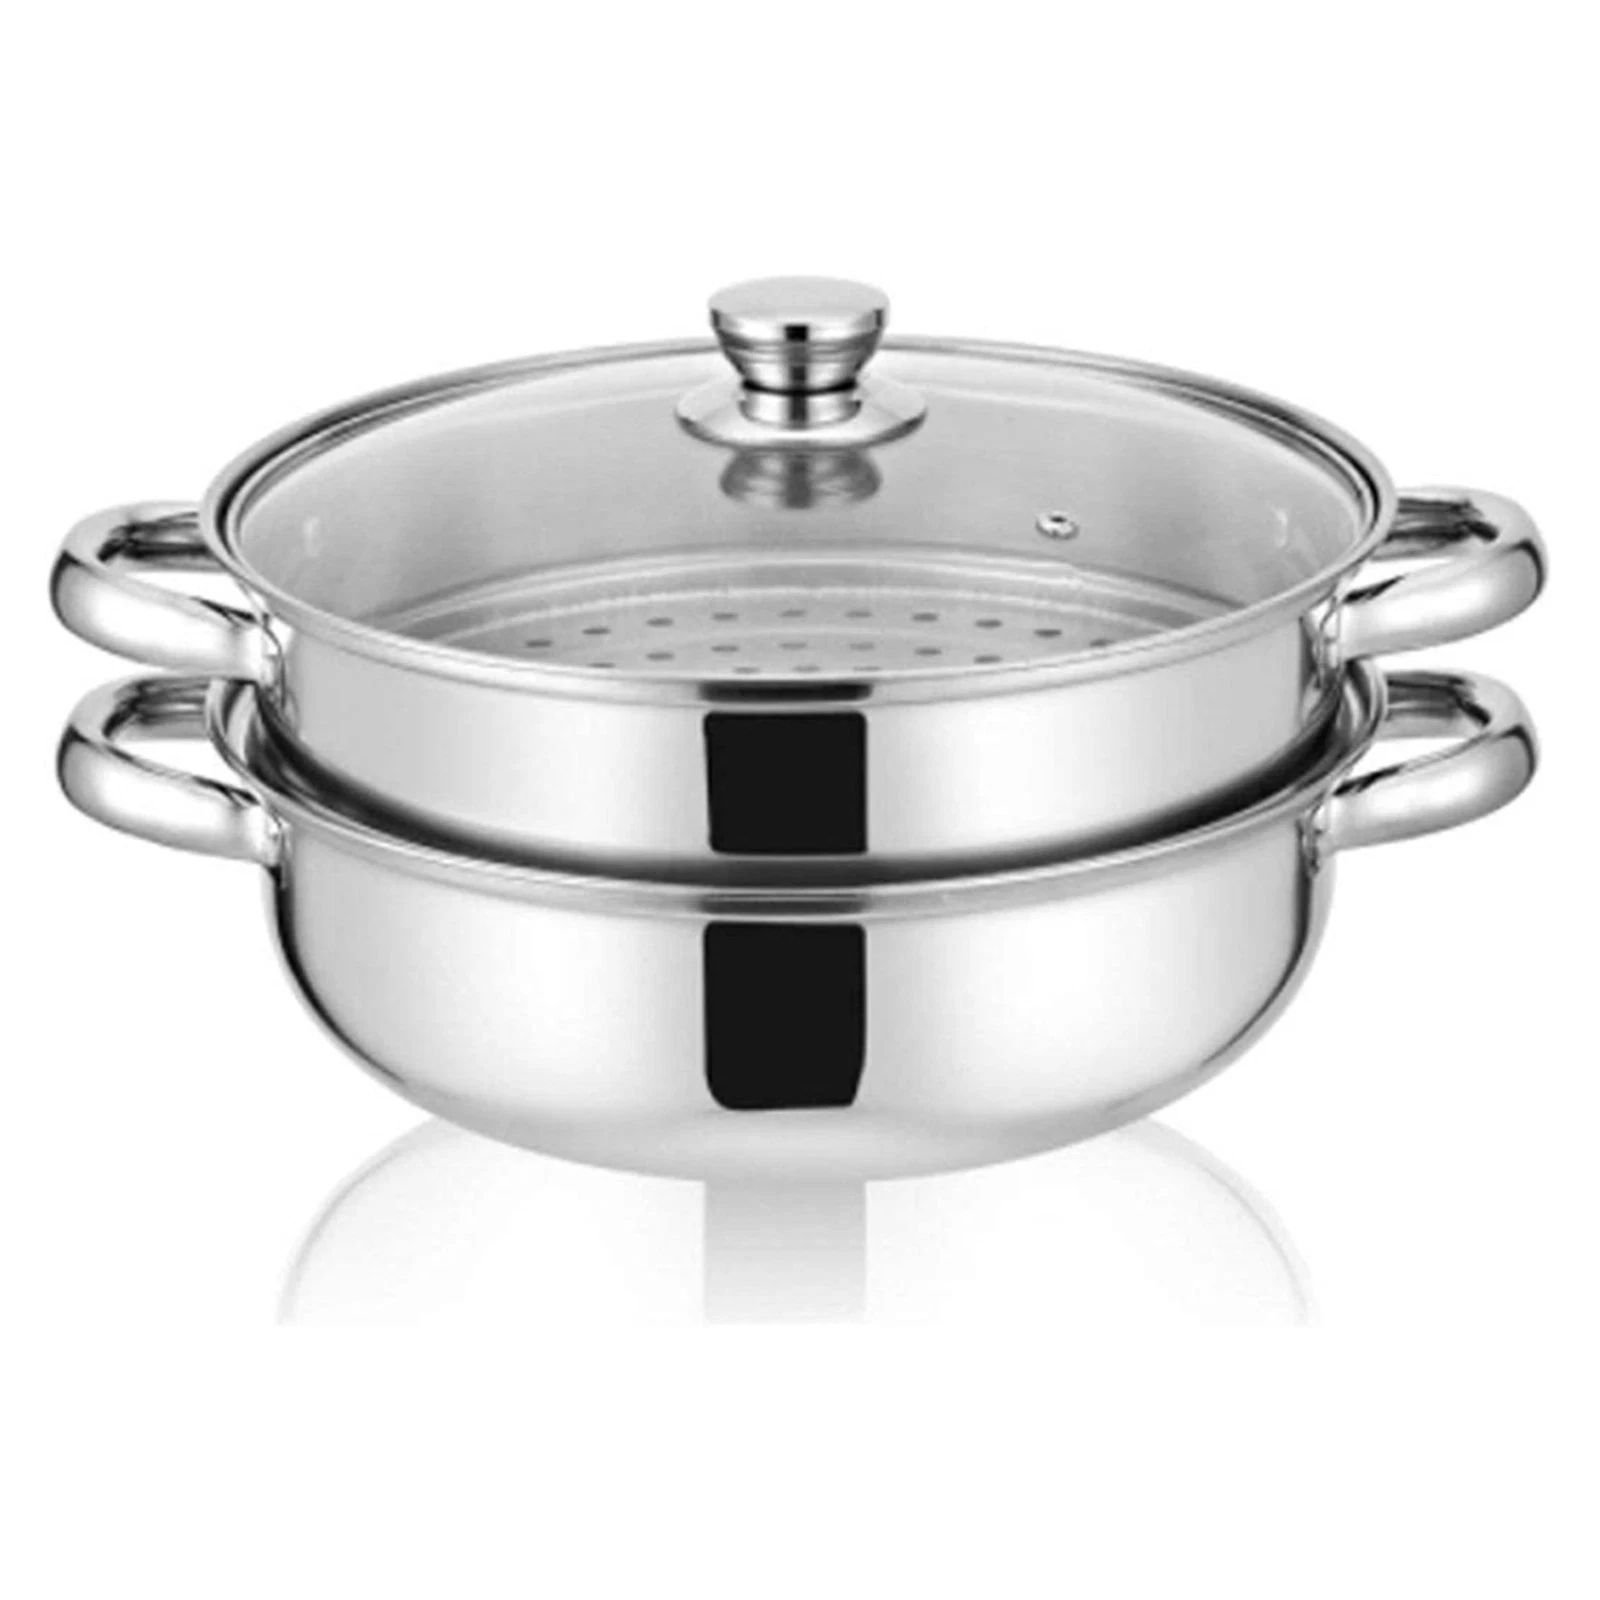 Tramontina 3 Piece Set Nonstick Everyday Pan With Glass Lid, 5.5 qt + Stainless-Steel Steamer 